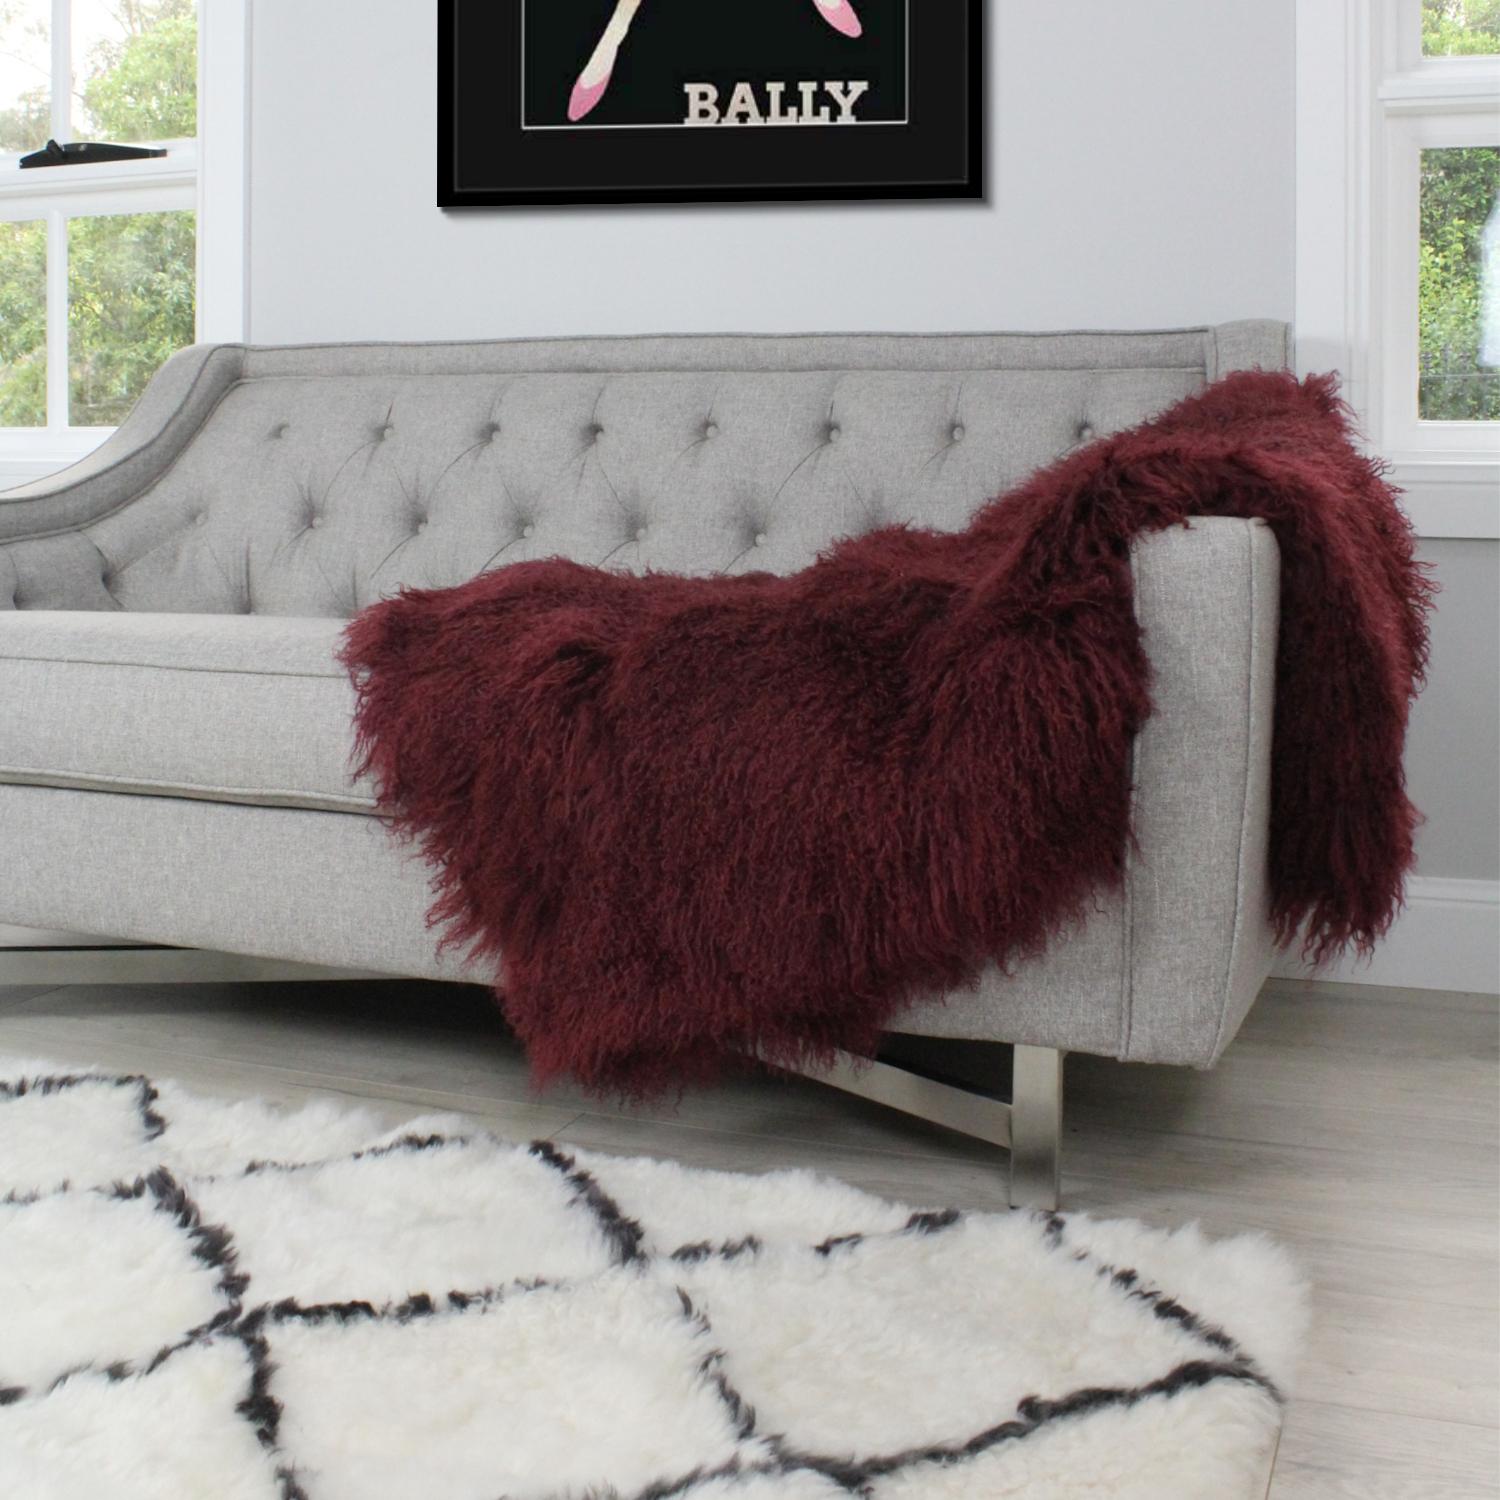 This super luxe burgundy red fur throw will add luxurious and inviting elements to your décor. Whether styling a chair, sofa or bed, the real fur throw blanket will instantly revamp a room into a designer interior as the curly / crimp fur like wool